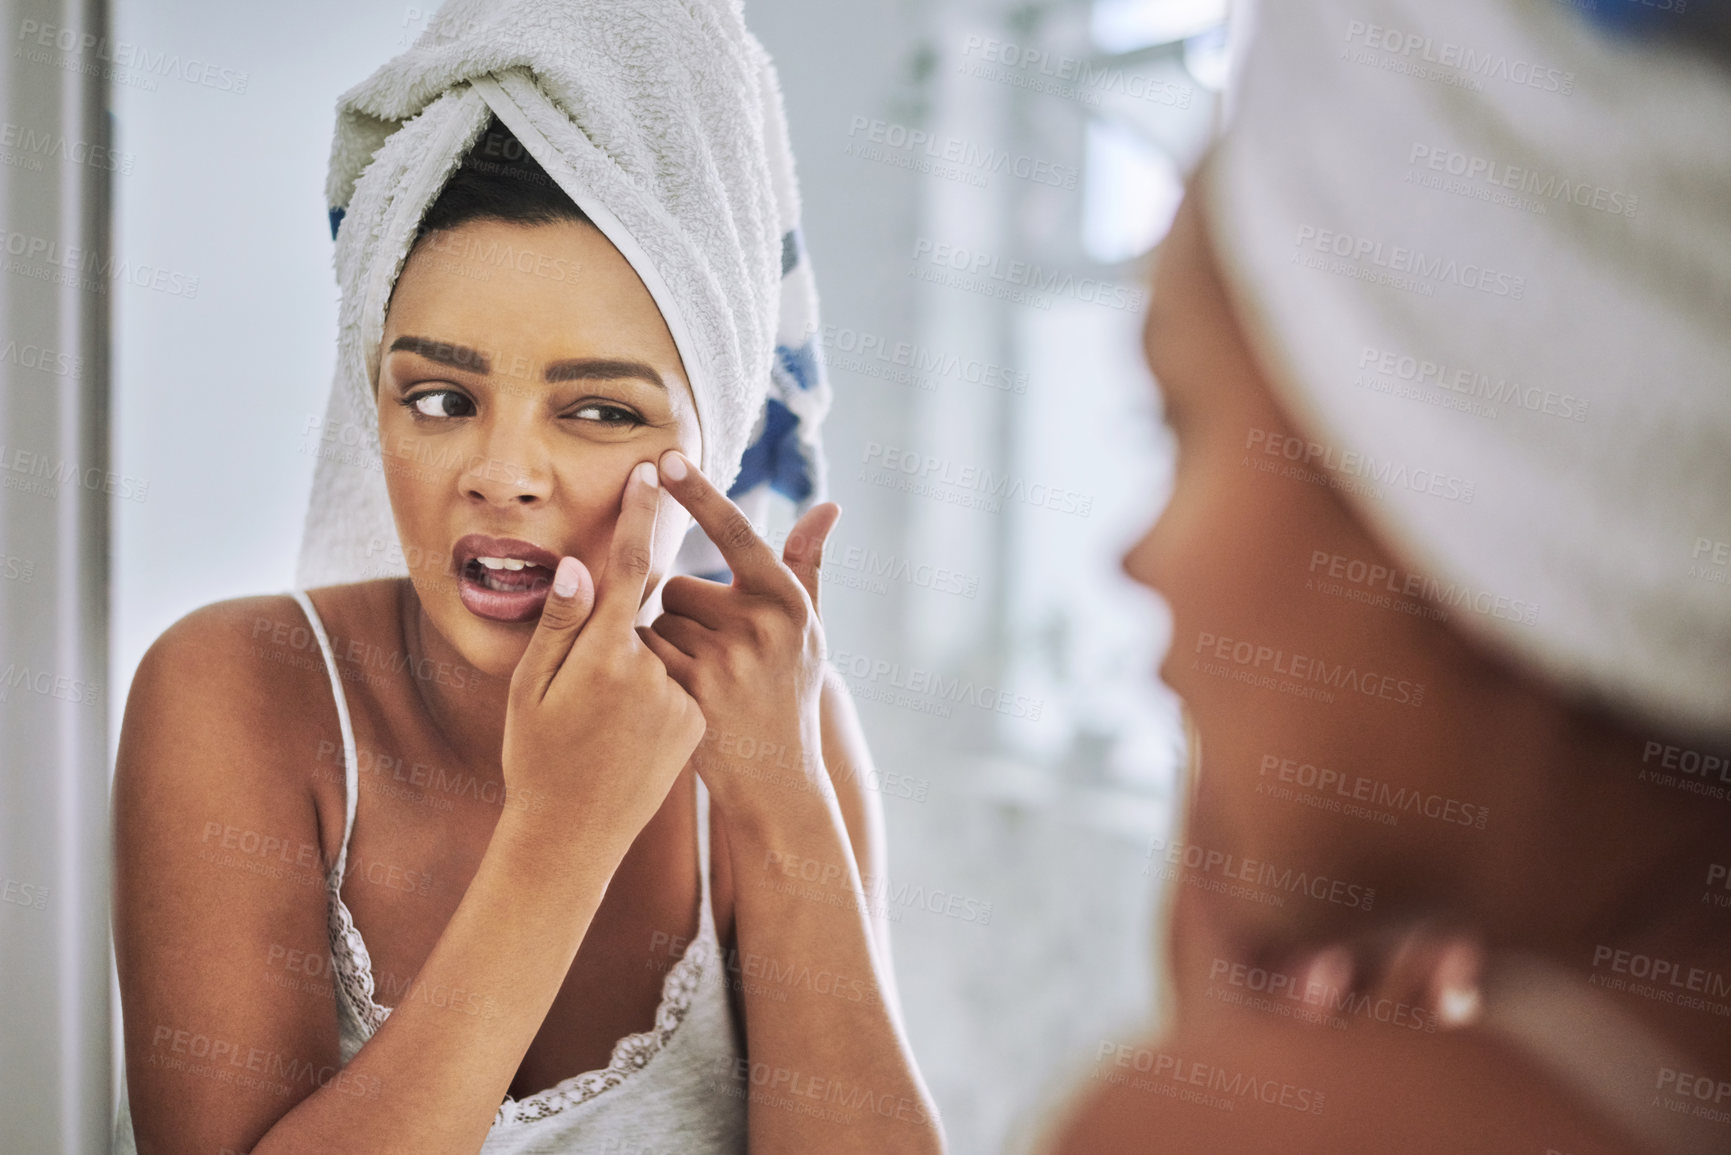 Buy stock photo Shot of an attractive young woman squeezing a pimple on her face in the bathroom